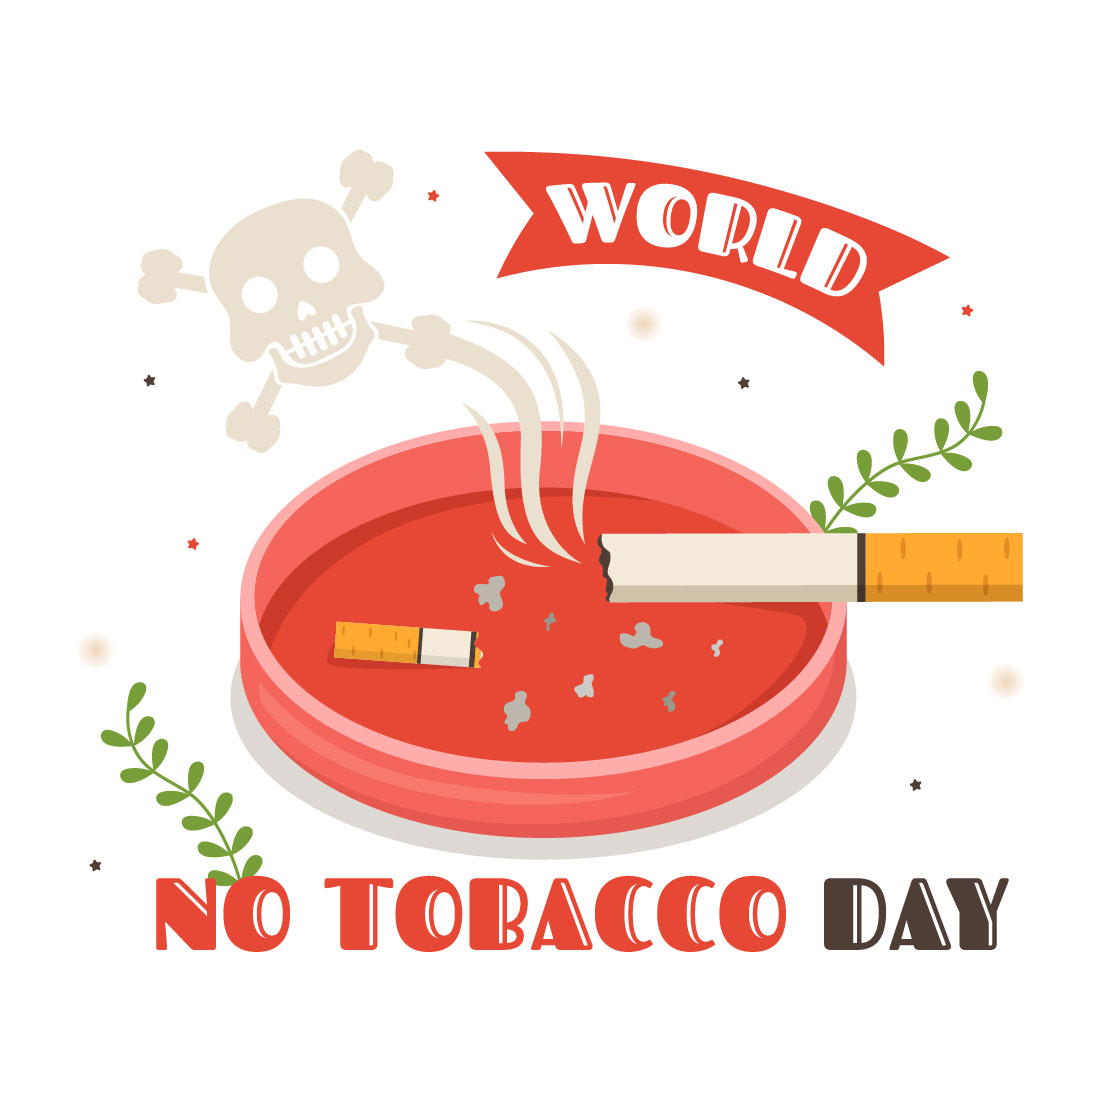 14 World No Tobacco Day Illustration preview image.